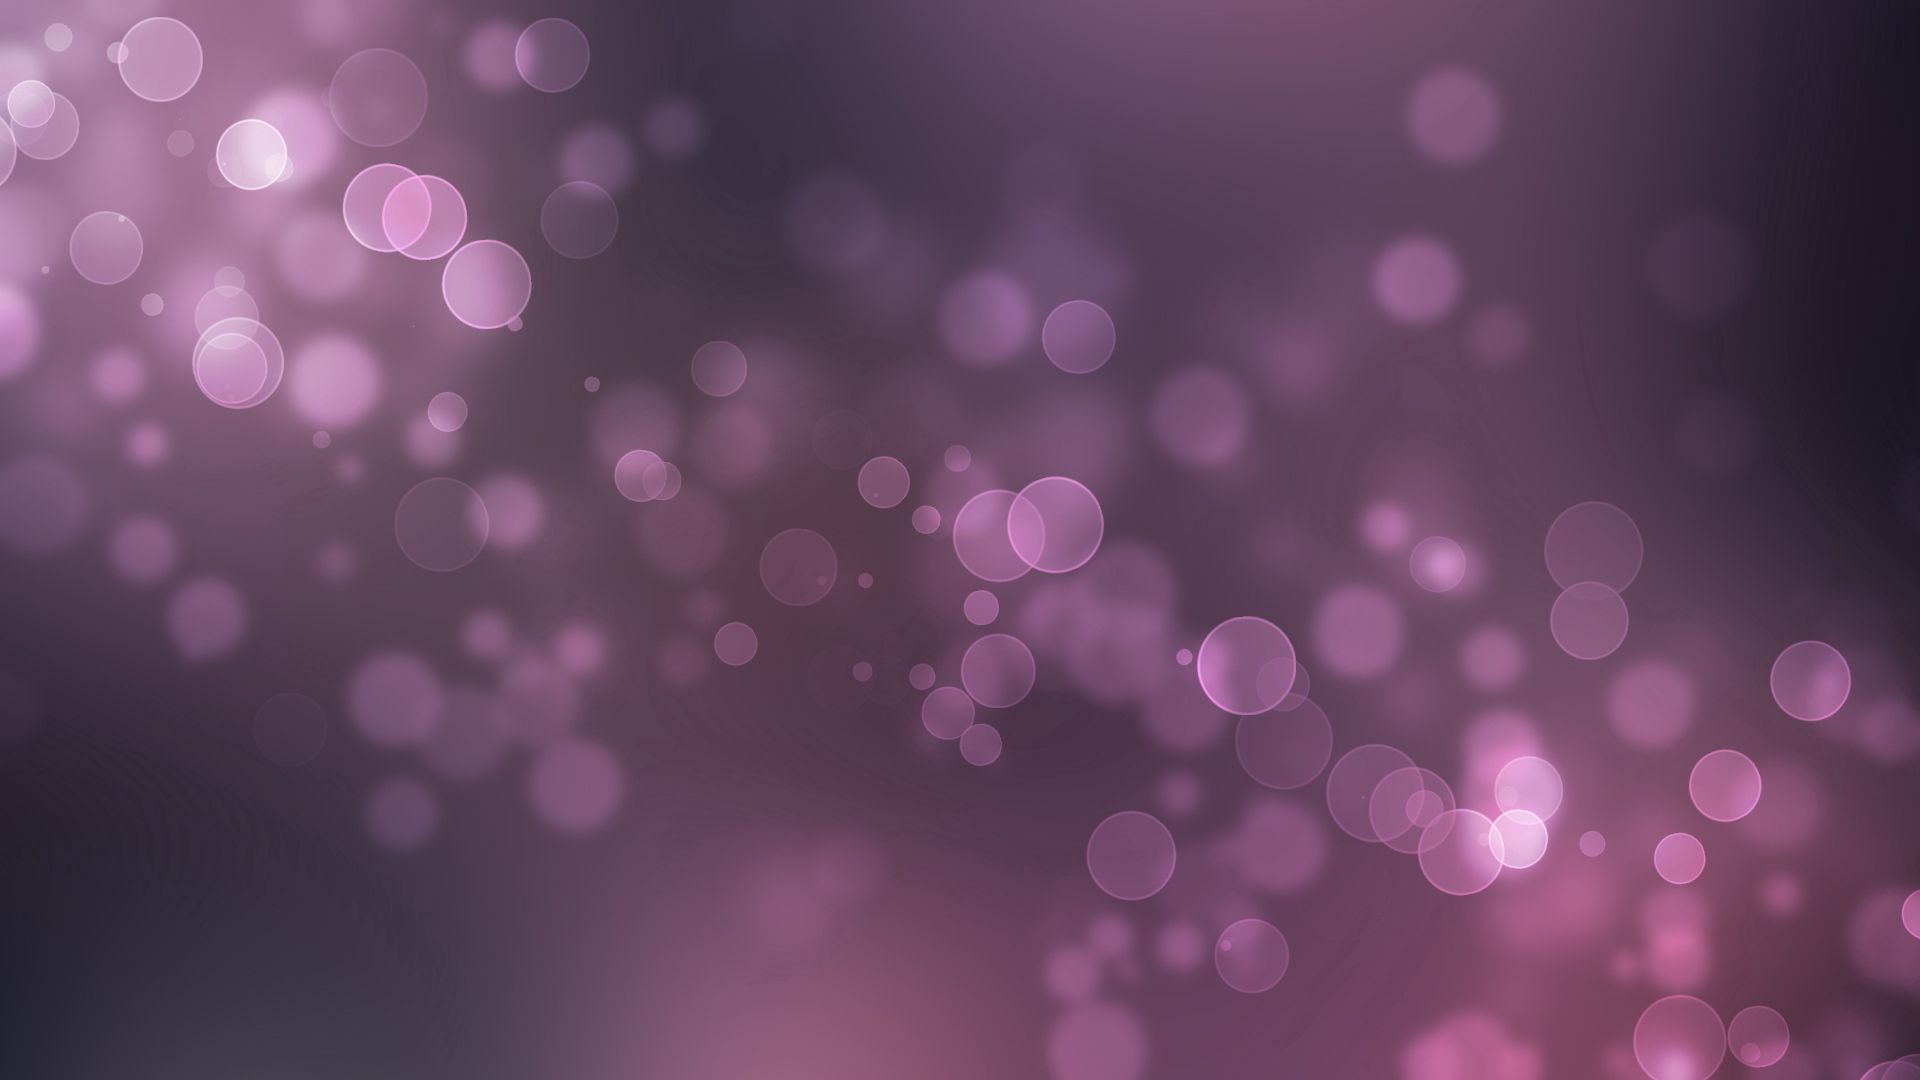 New Lock Screen Wallpapers circles, lilac, abstract, glare, shine, light